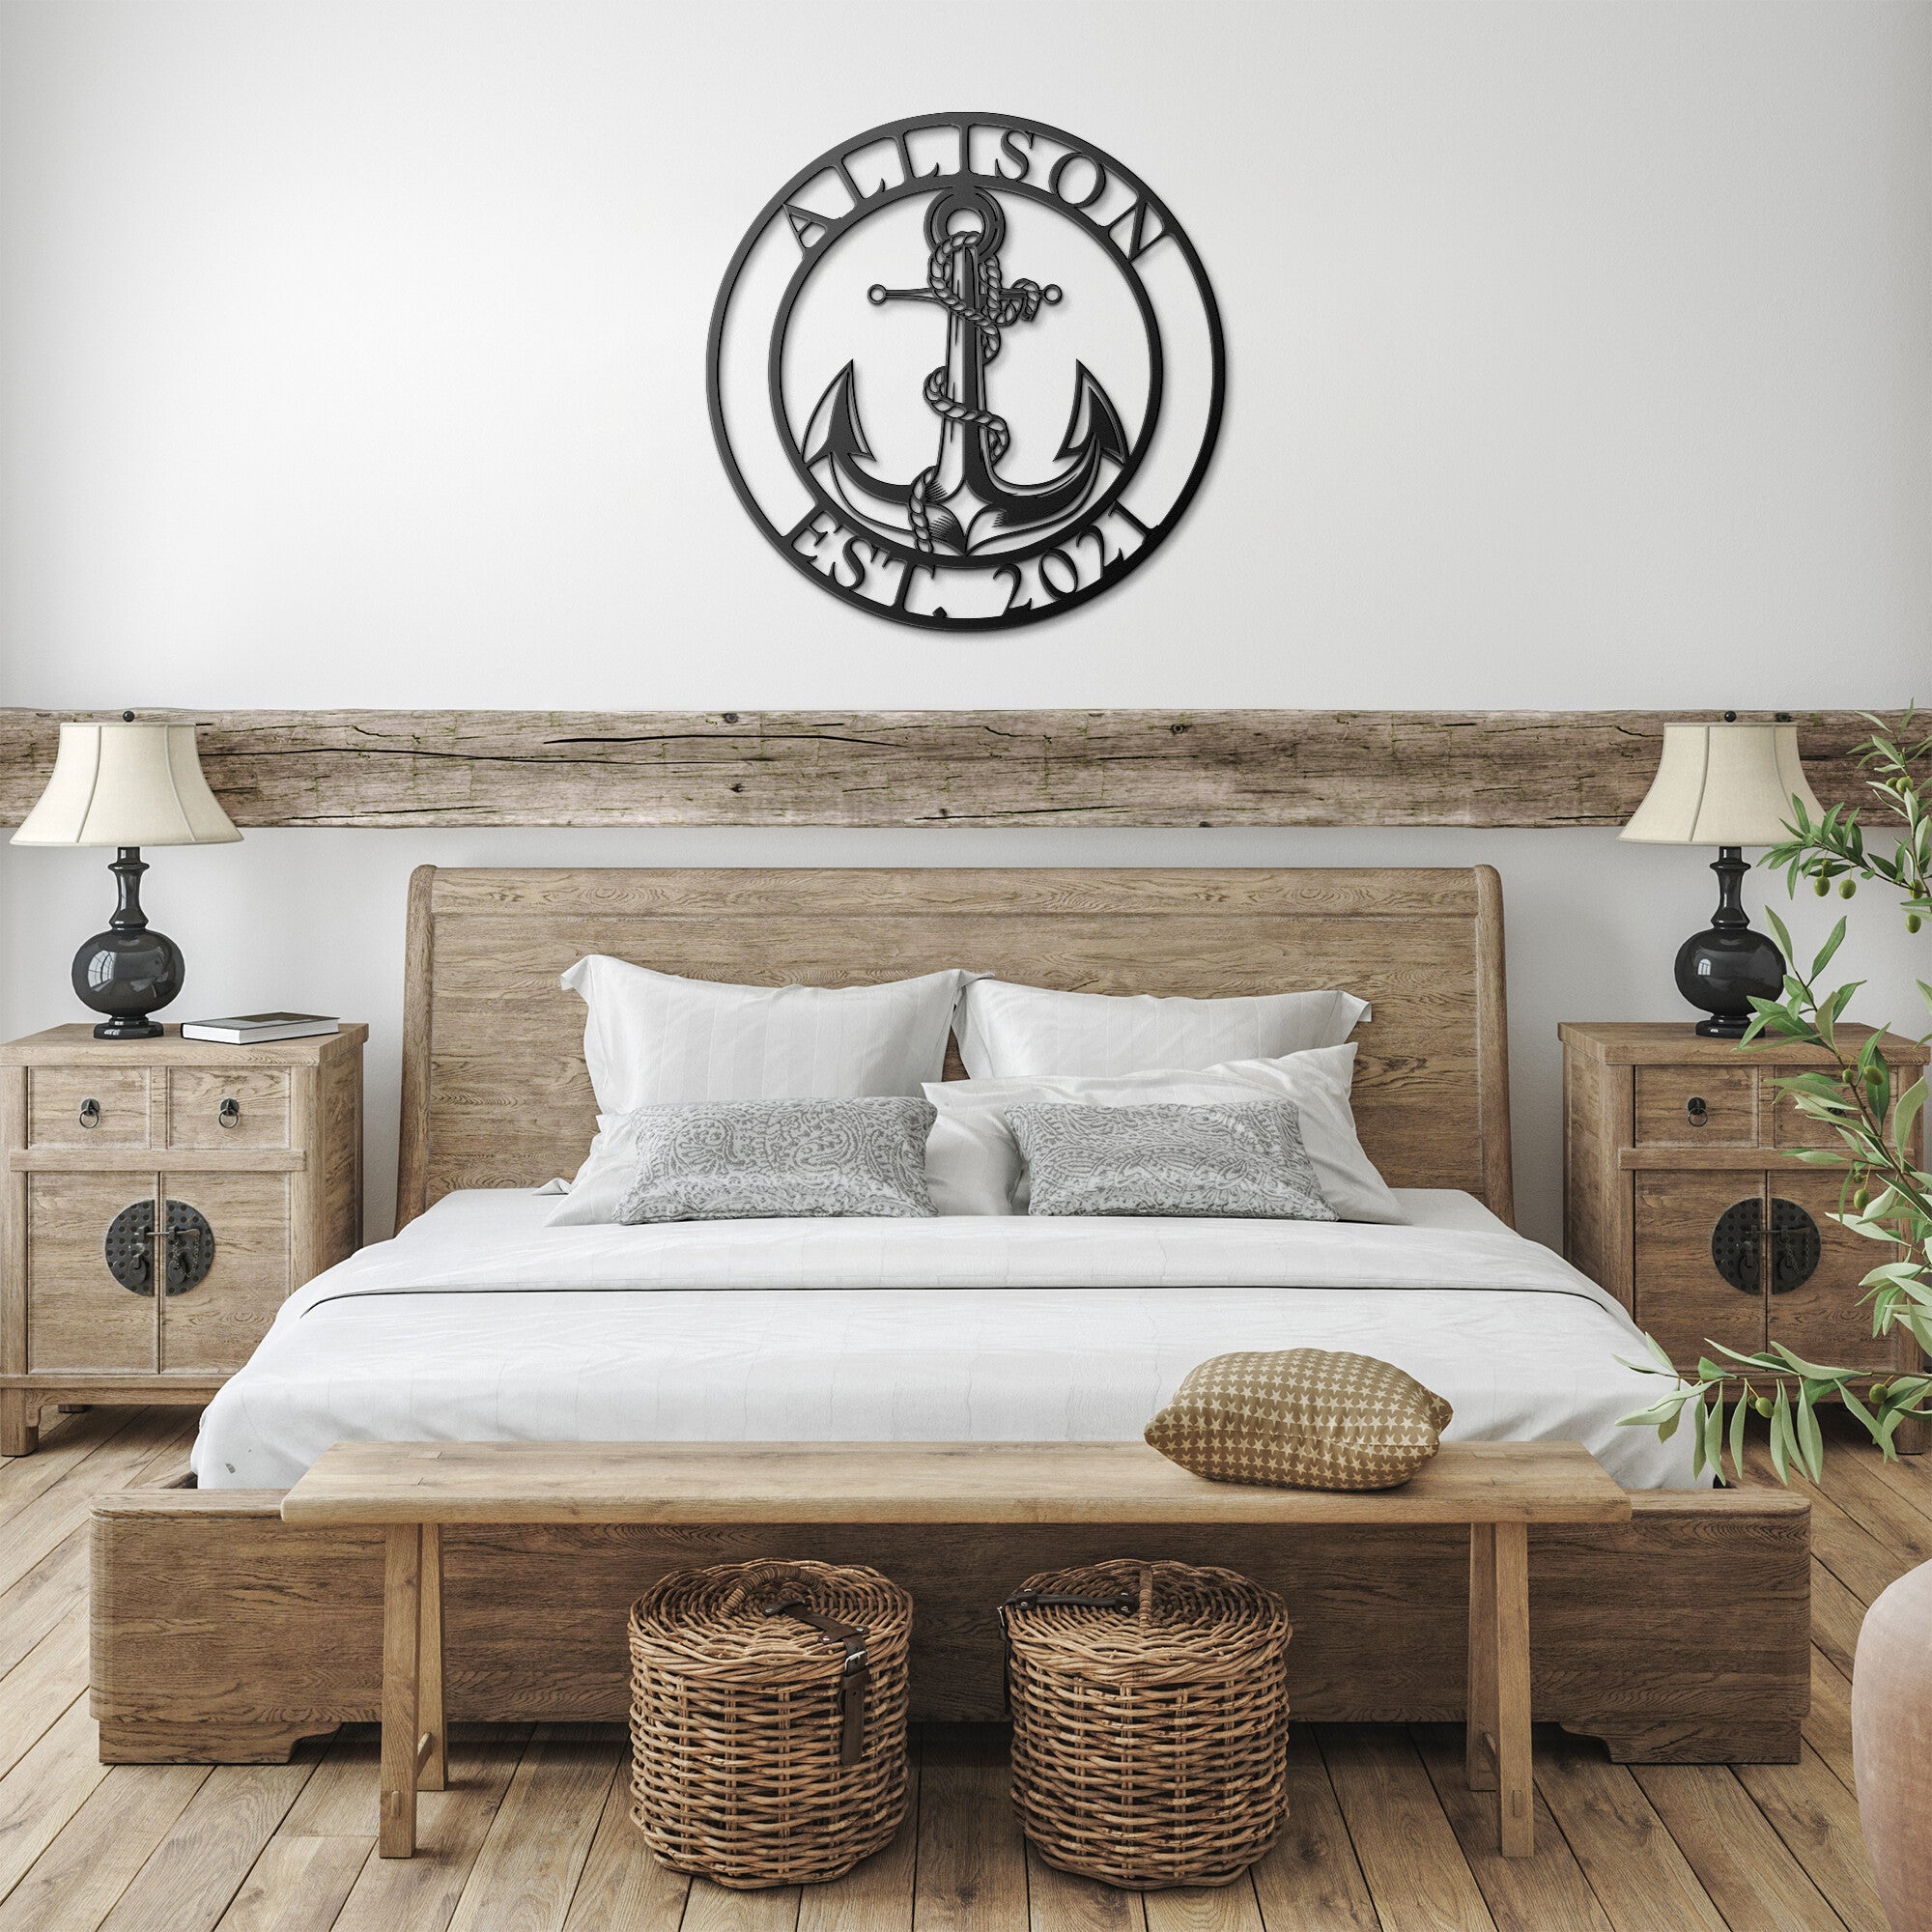 Personalized Anchor & Rope Boat House Metal Sign